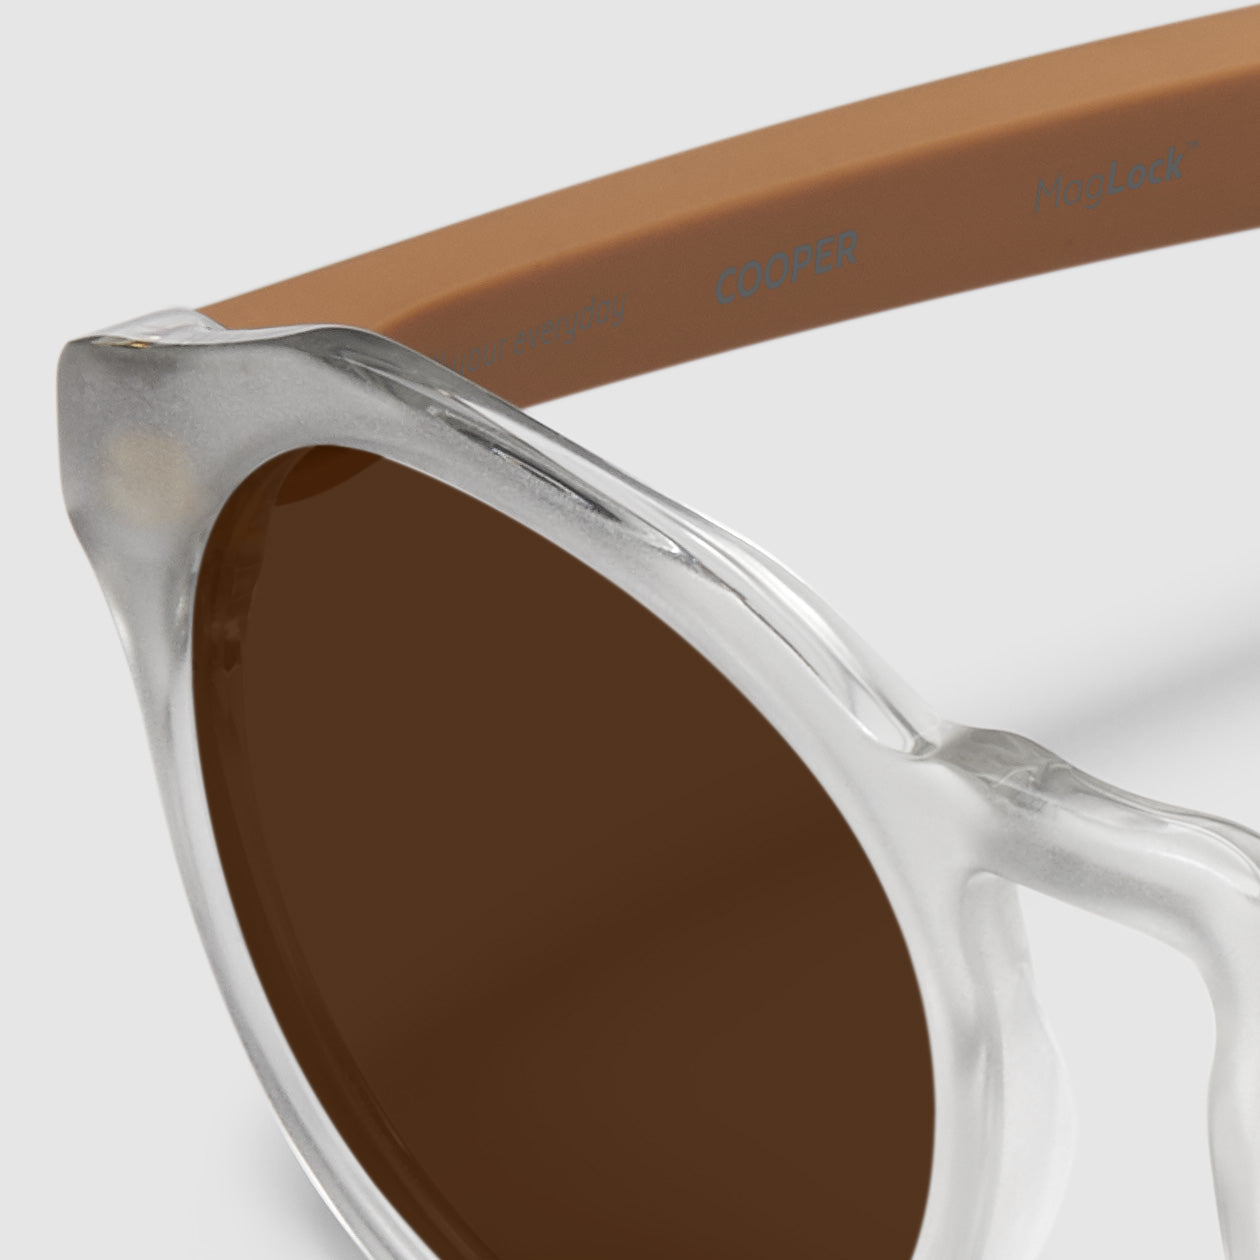 close up view of distil cooper sunglasses with matte crystal frames and amber polarized lens